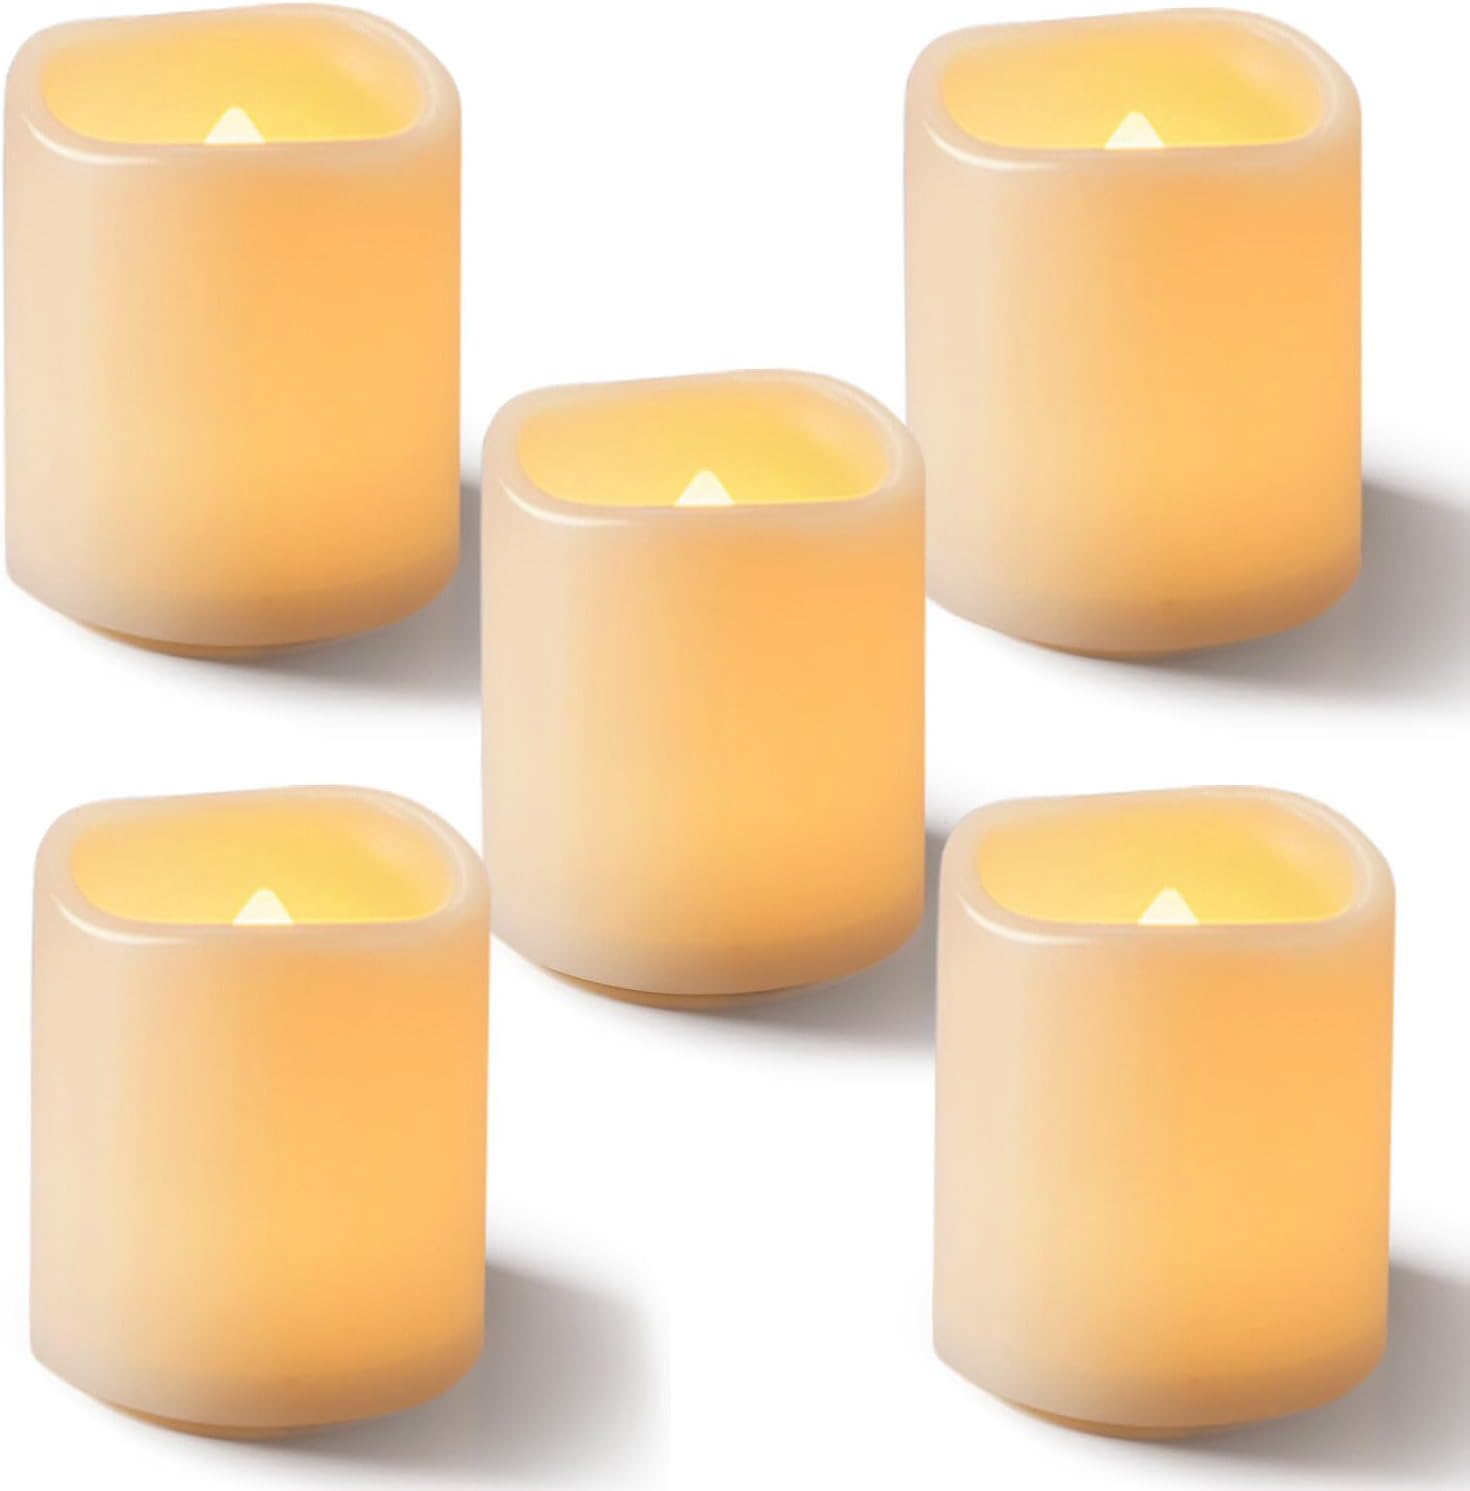 Homemory Flickering Flameless Votive Candles, 12PCS Battery Operated LED Votive Tealight Candles, Realistic Electricn Fake Candle for Easter, Wedding, Table (Battery Included)